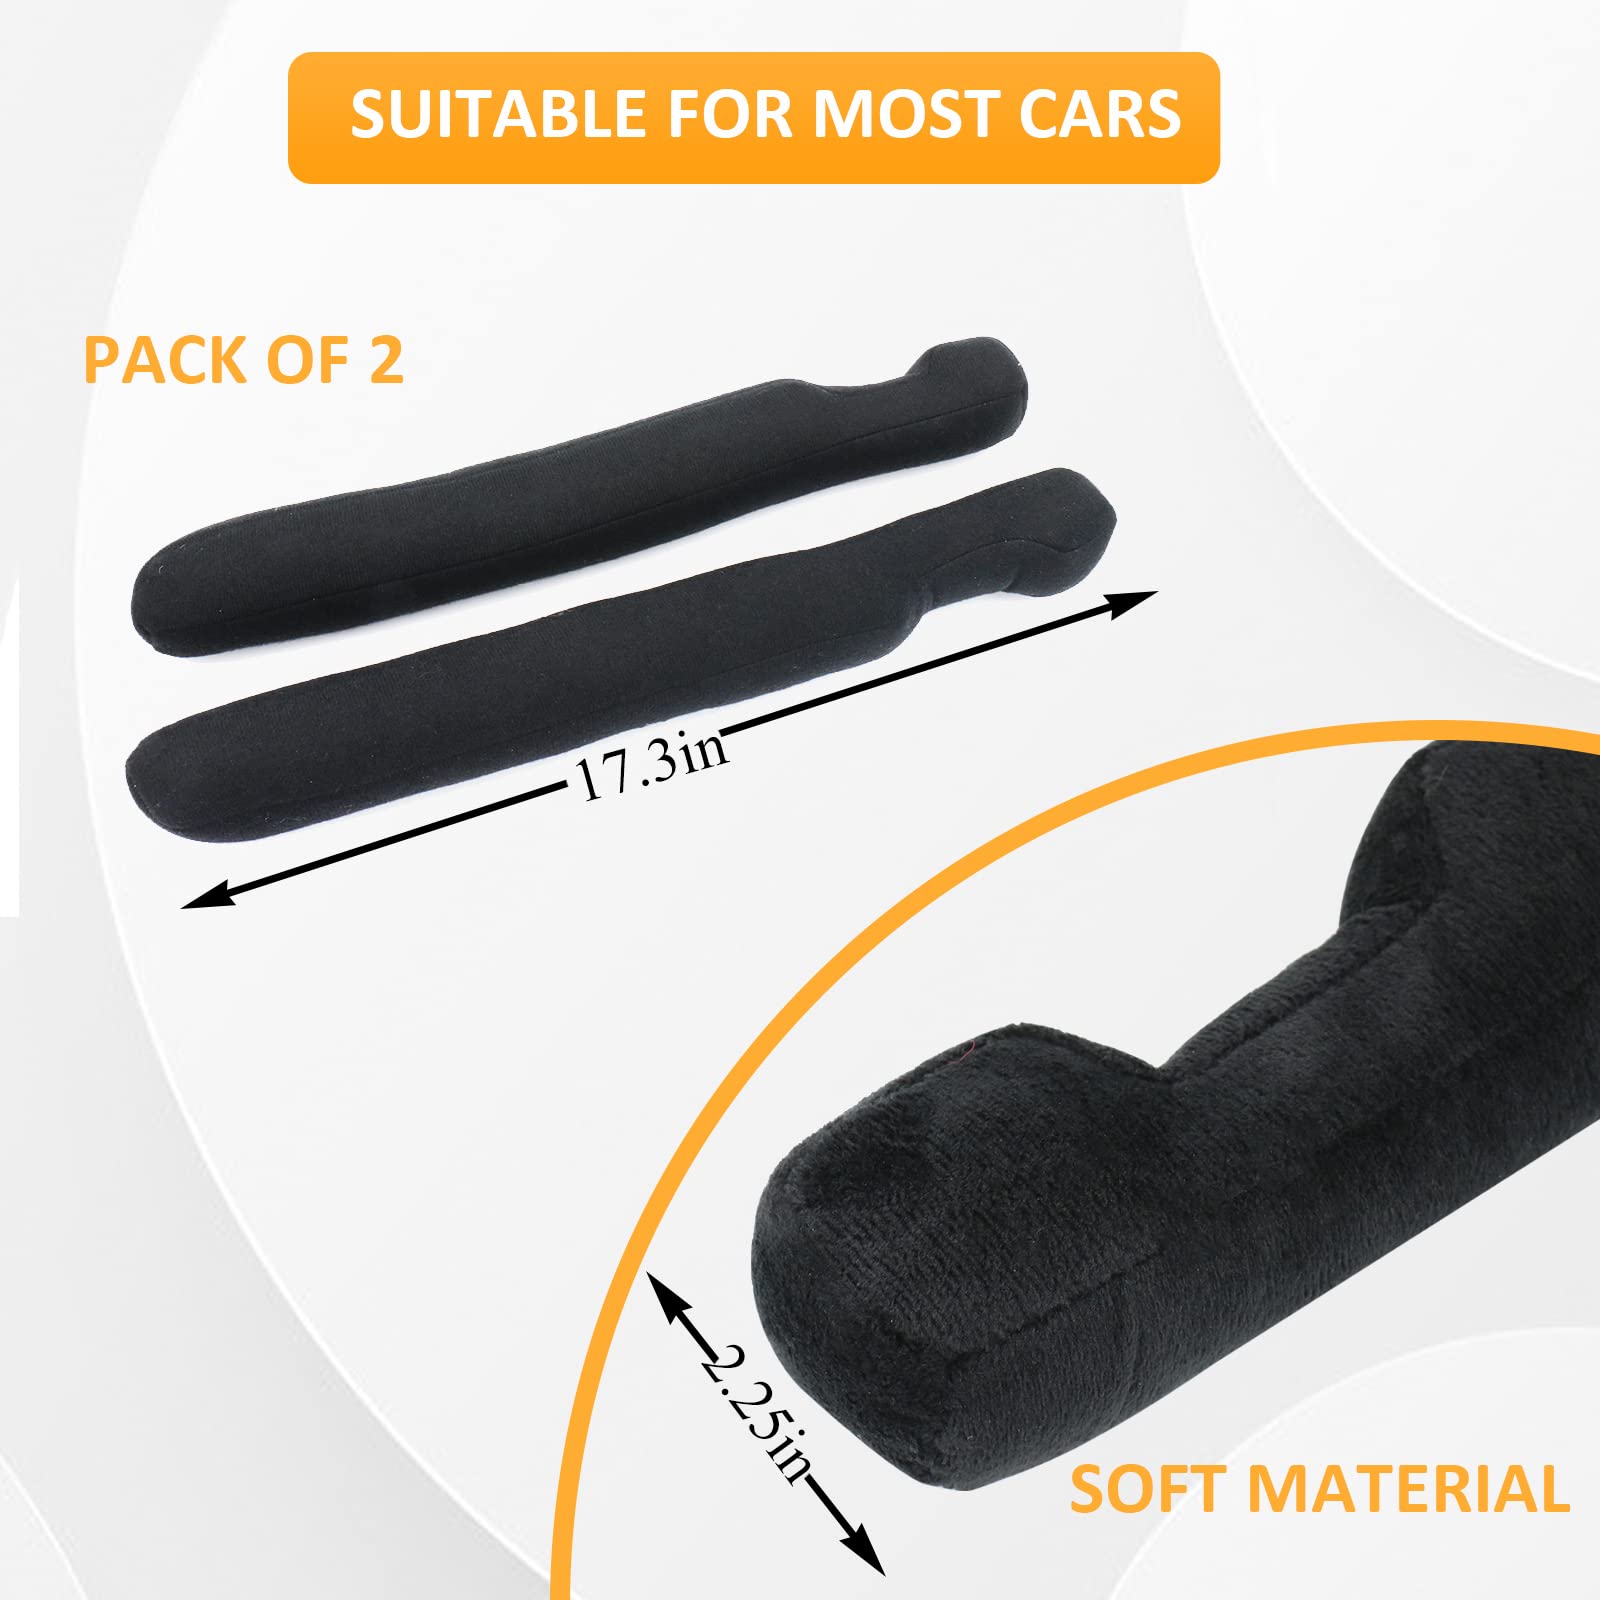 YLXGT Car Seat Gap Filler Universal for Car SUV Truck Fit Organizer Fill The Gap Between Seat and Console Stop Things from Dropping Black 2Pcs